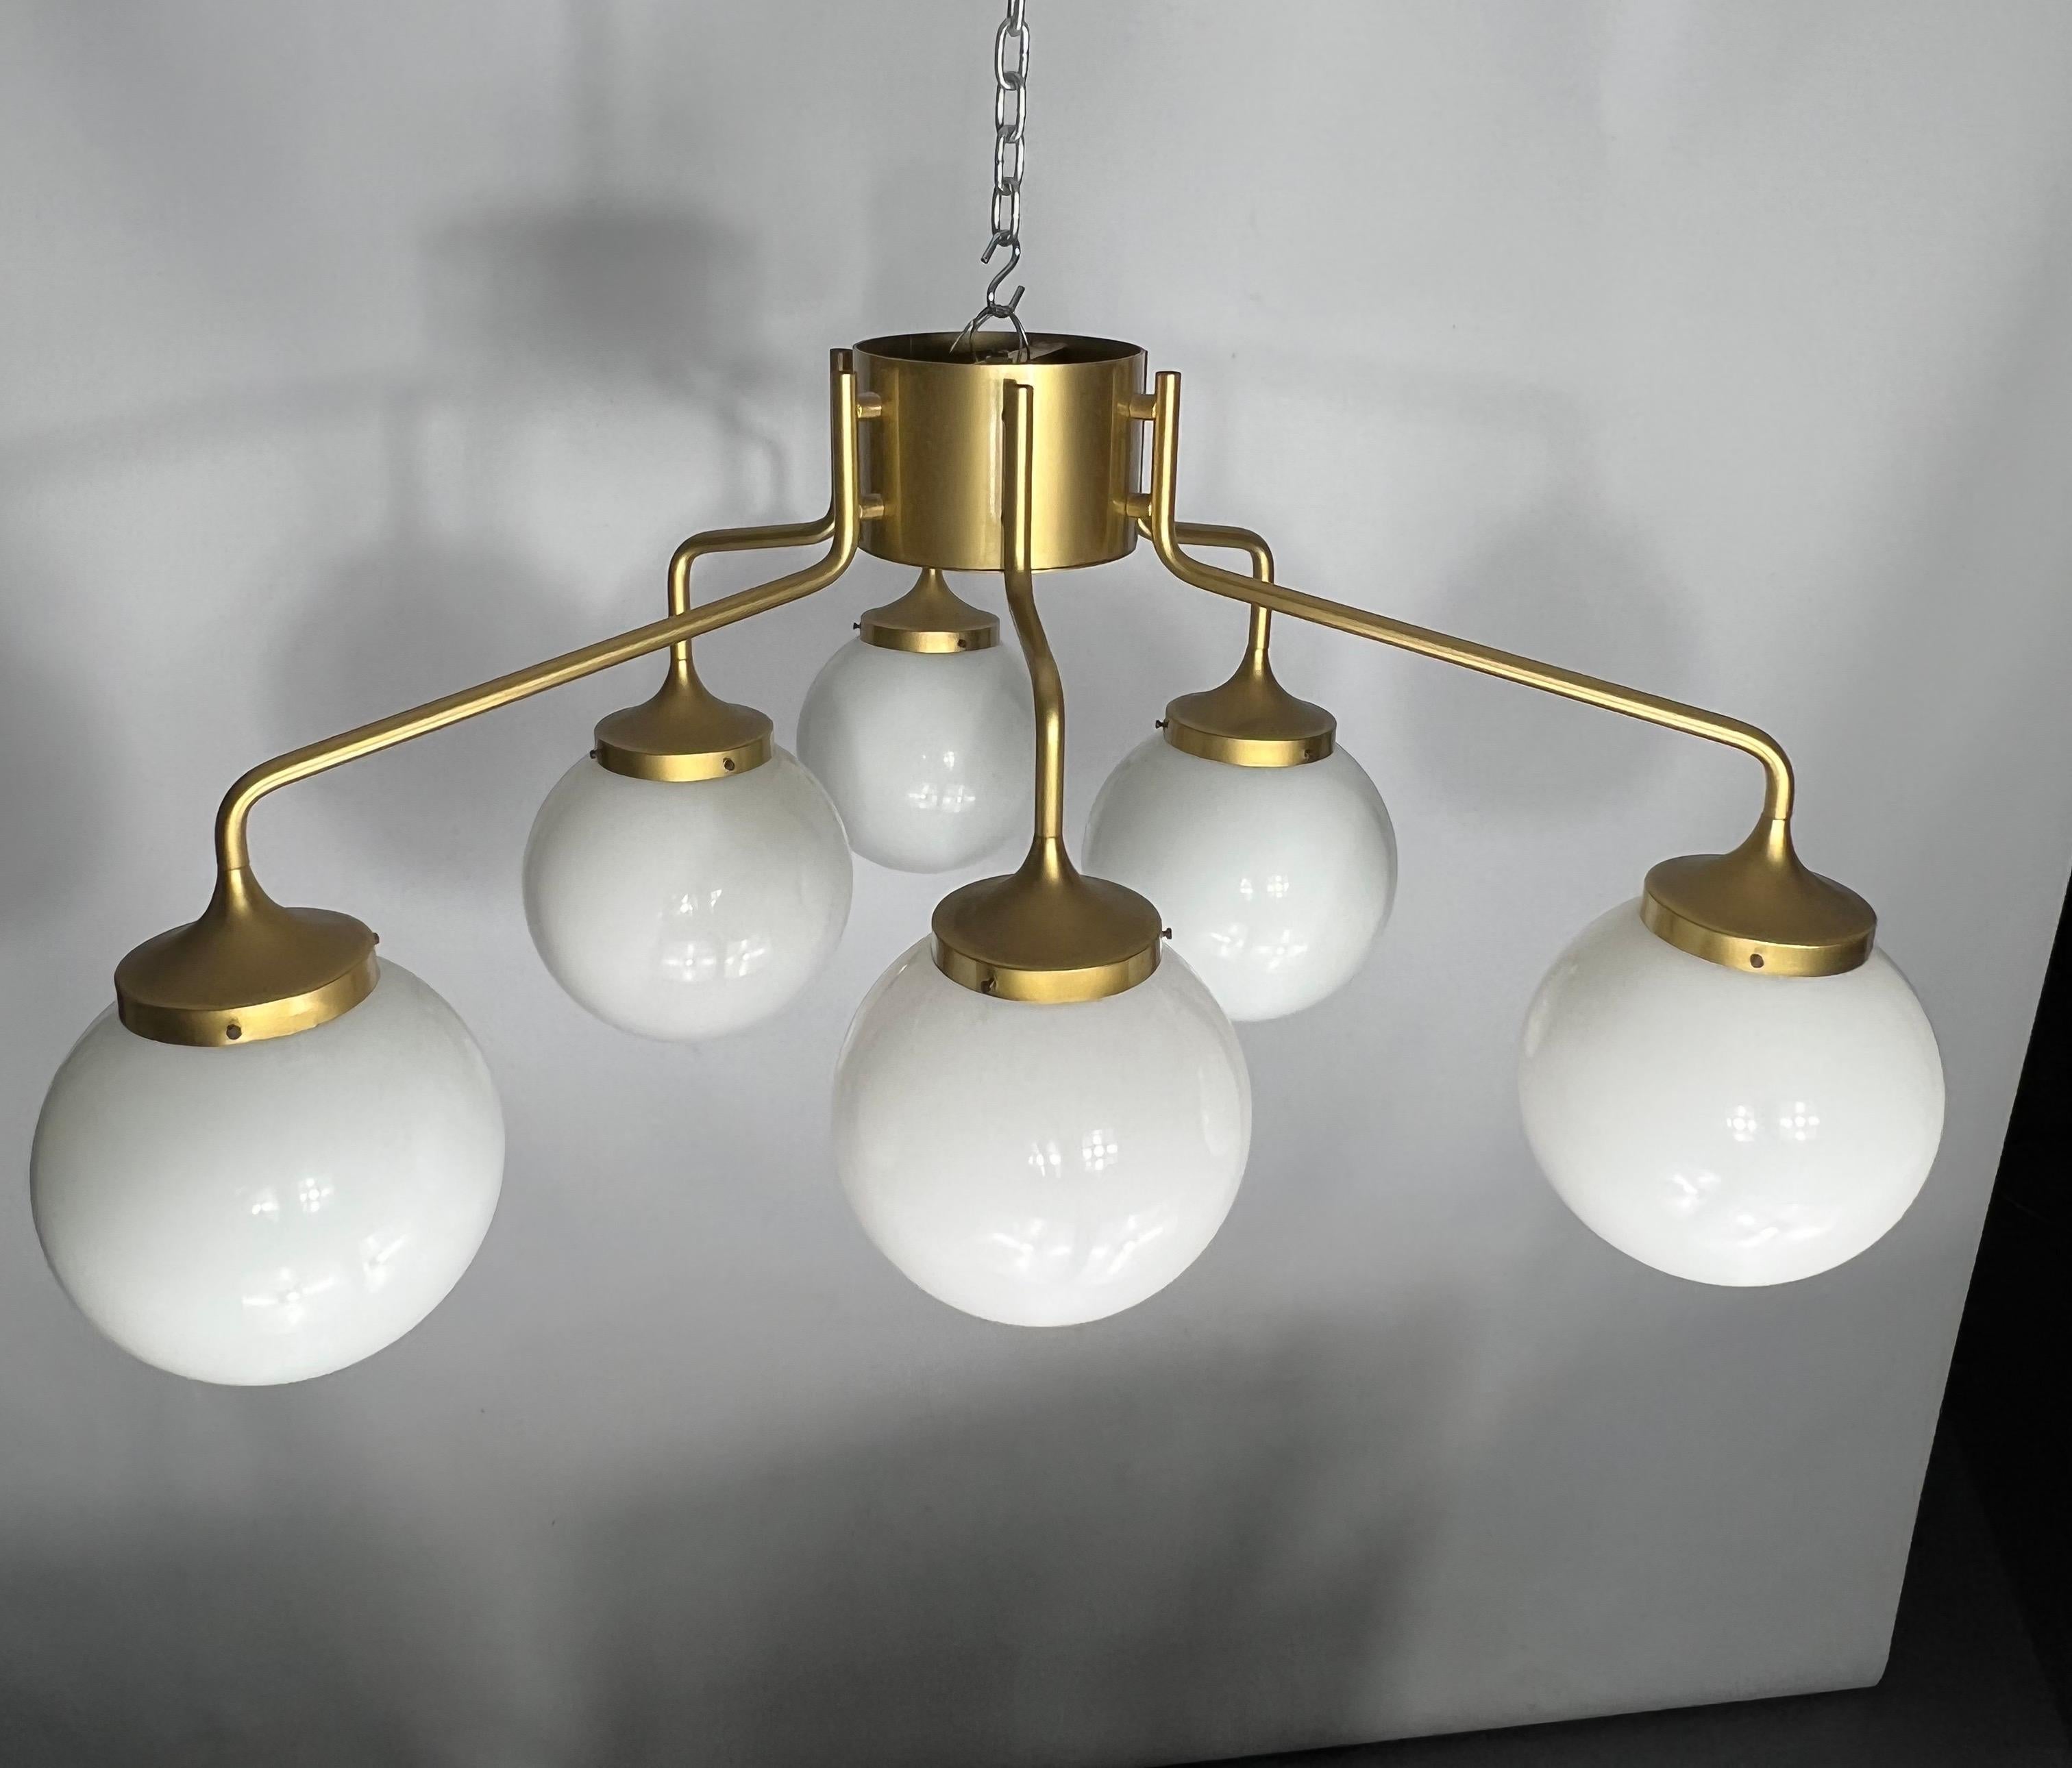 Monumental Mid-Century Brass and Milk Glass Ceiling Lamp by Reggiani, Italy 1970 For Sale 1